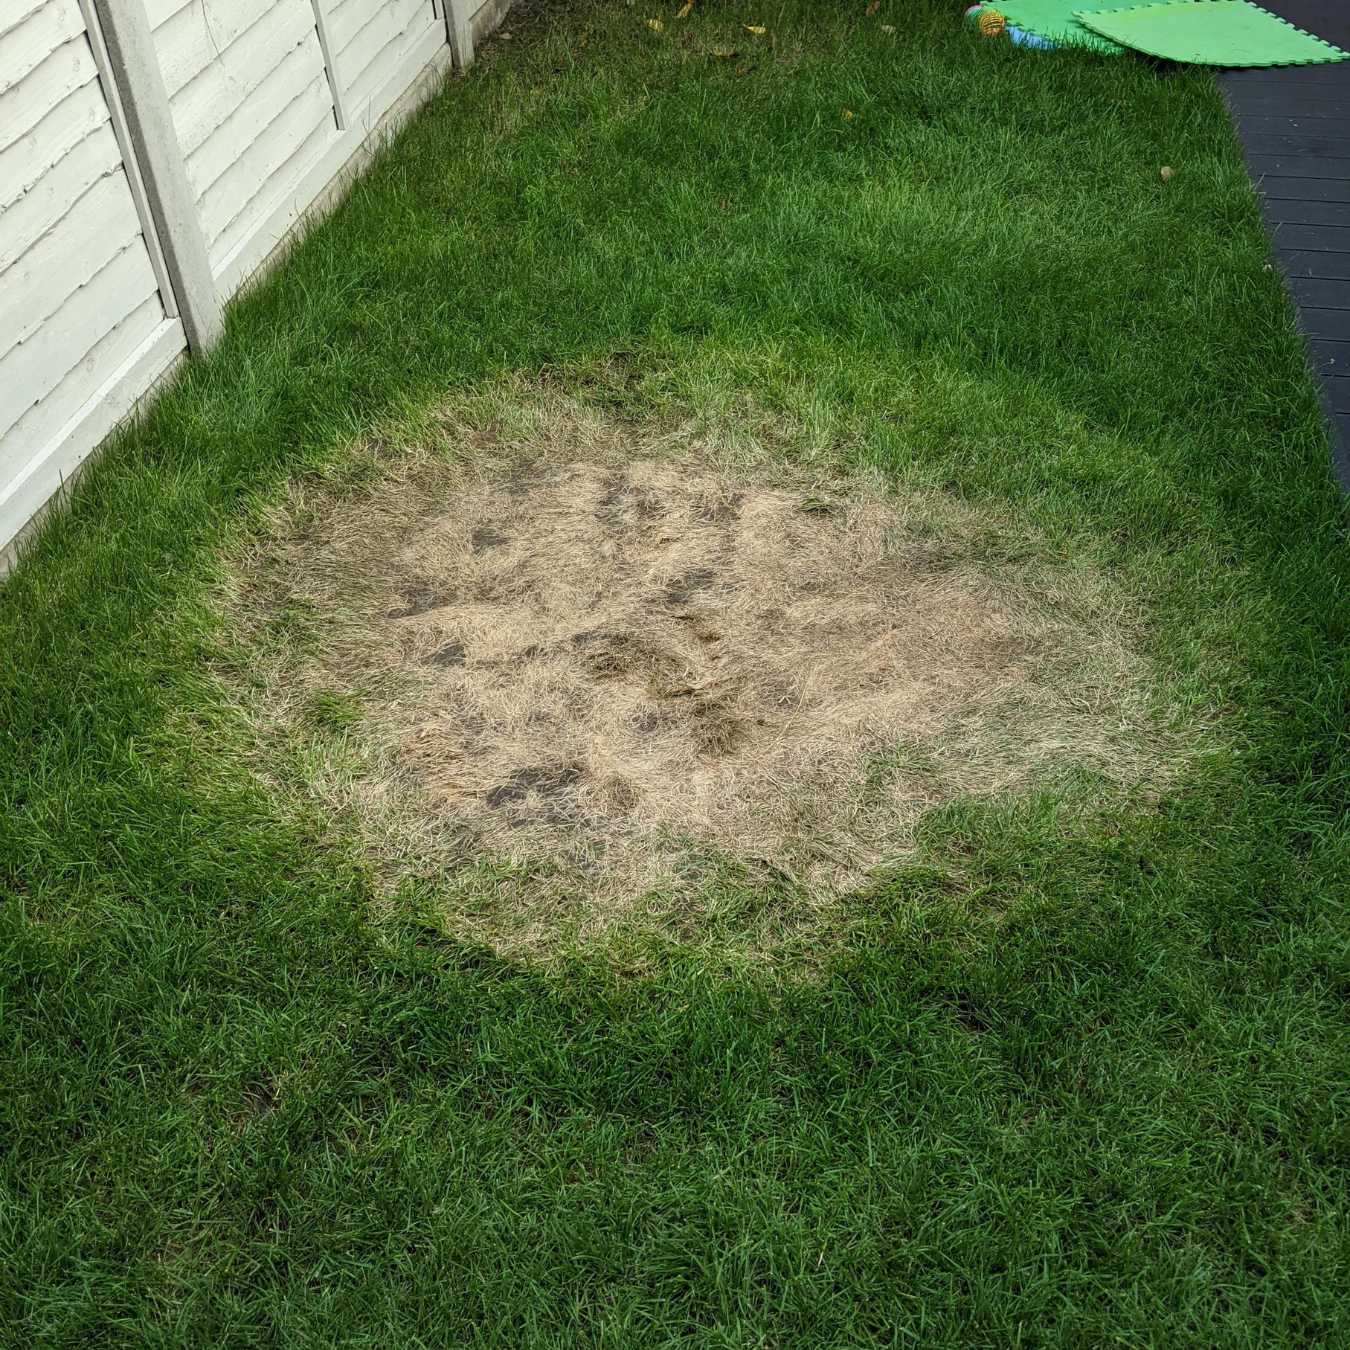 How To Fix Dead Grass From Pool